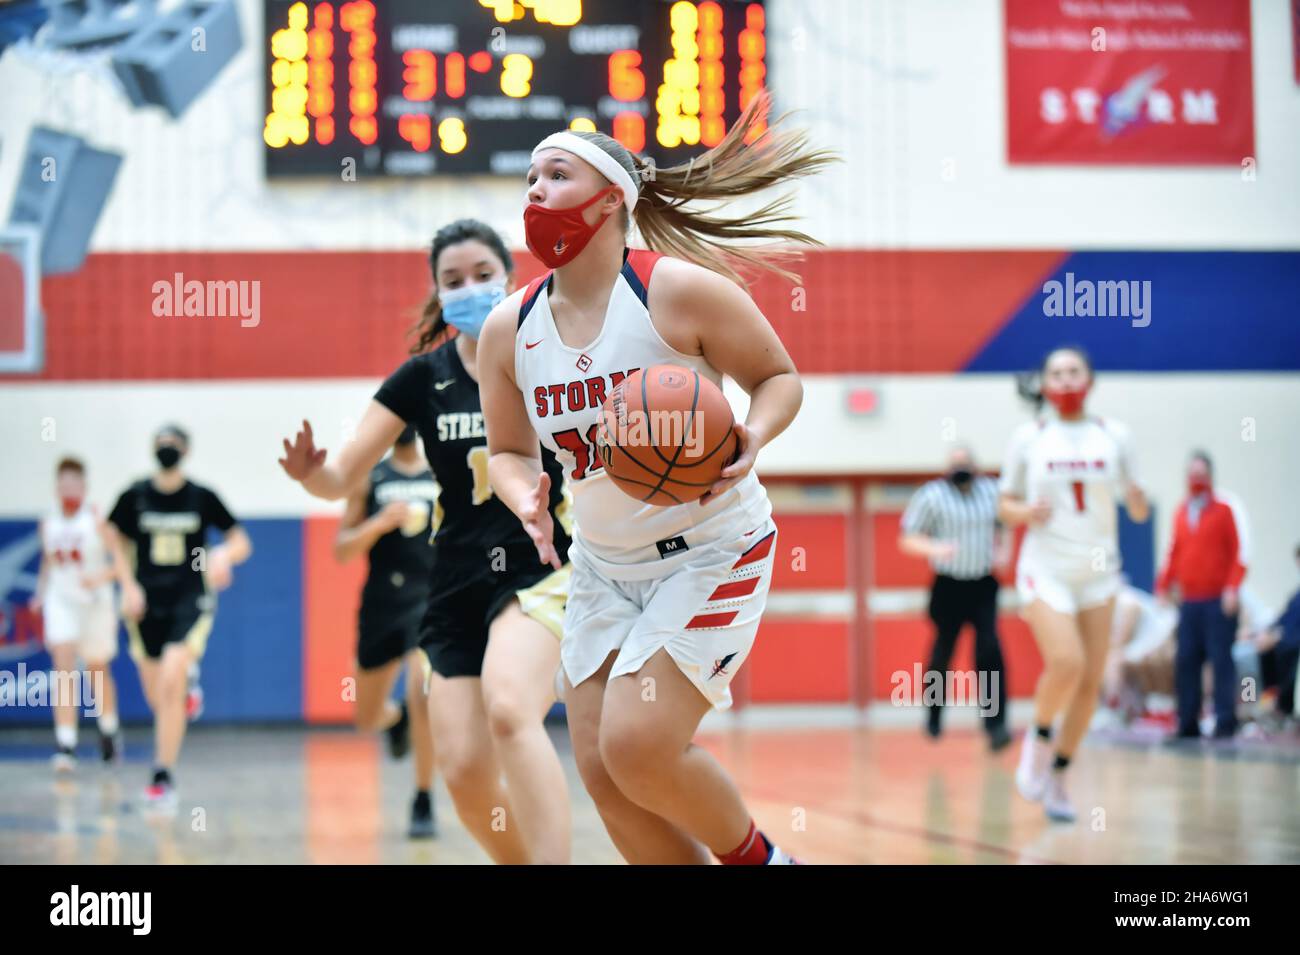 USA. Player finishing off an offensive drive during a high school basketball game. Stock Photo